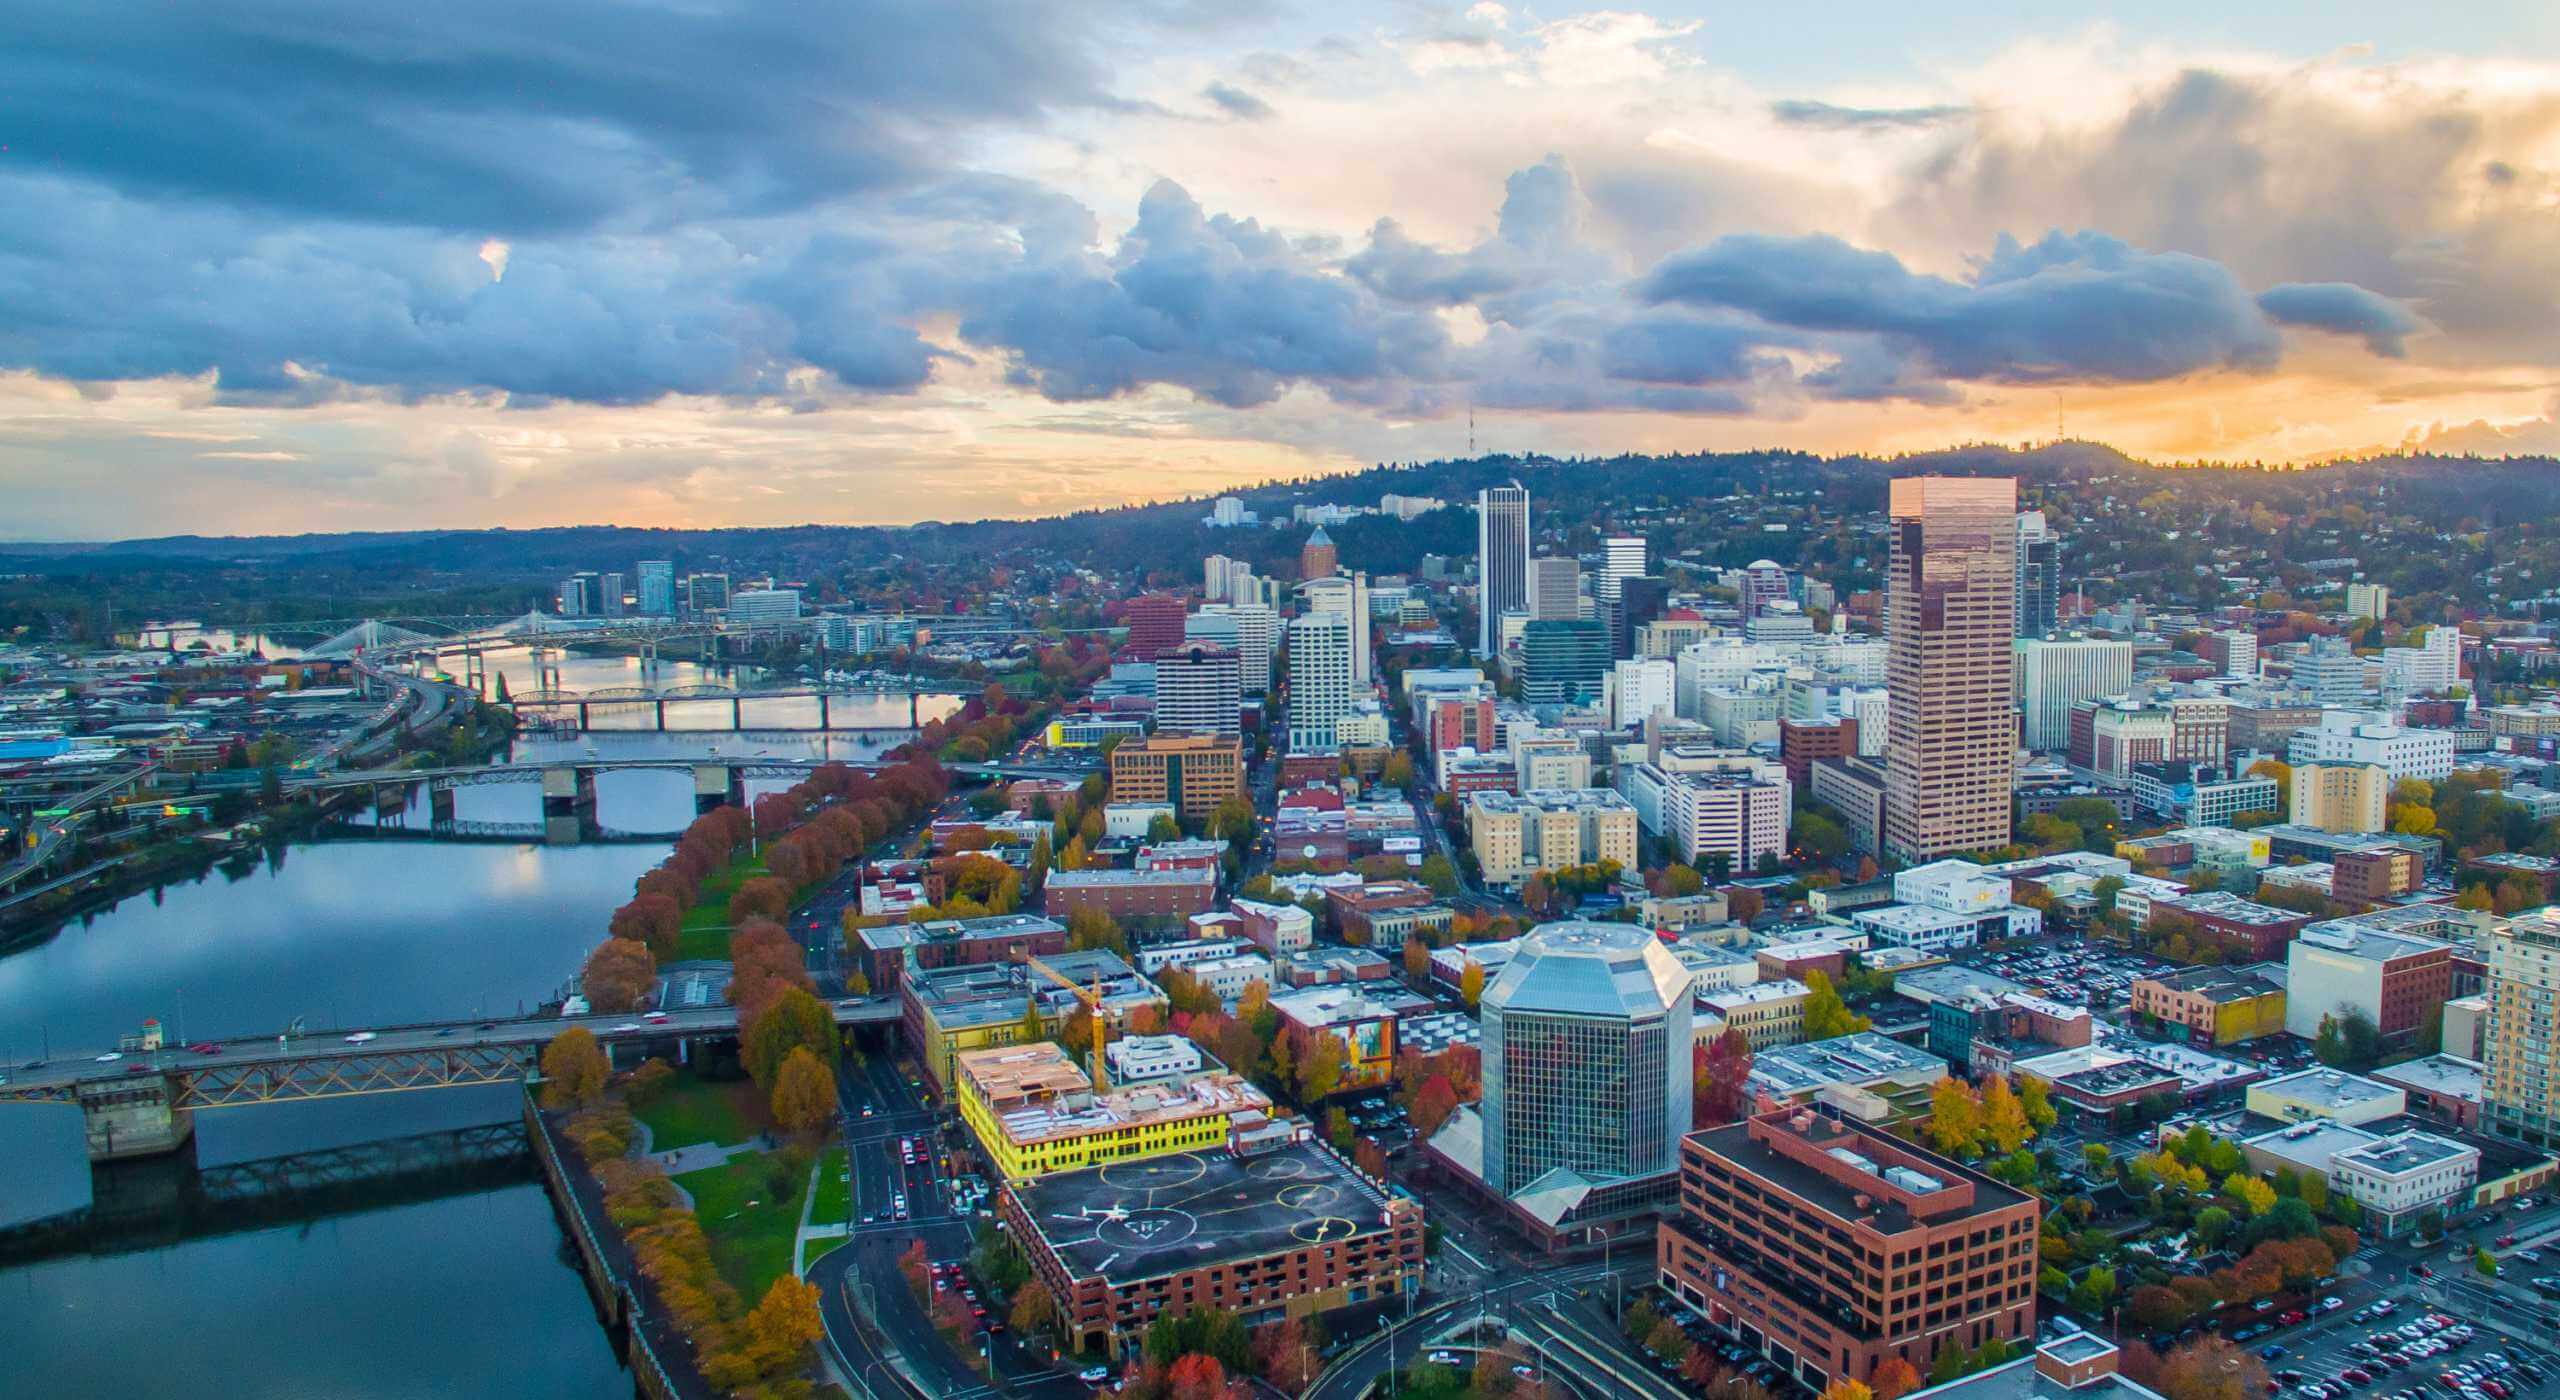 What are the Best Neighborhoods to live in Portland Oregon?